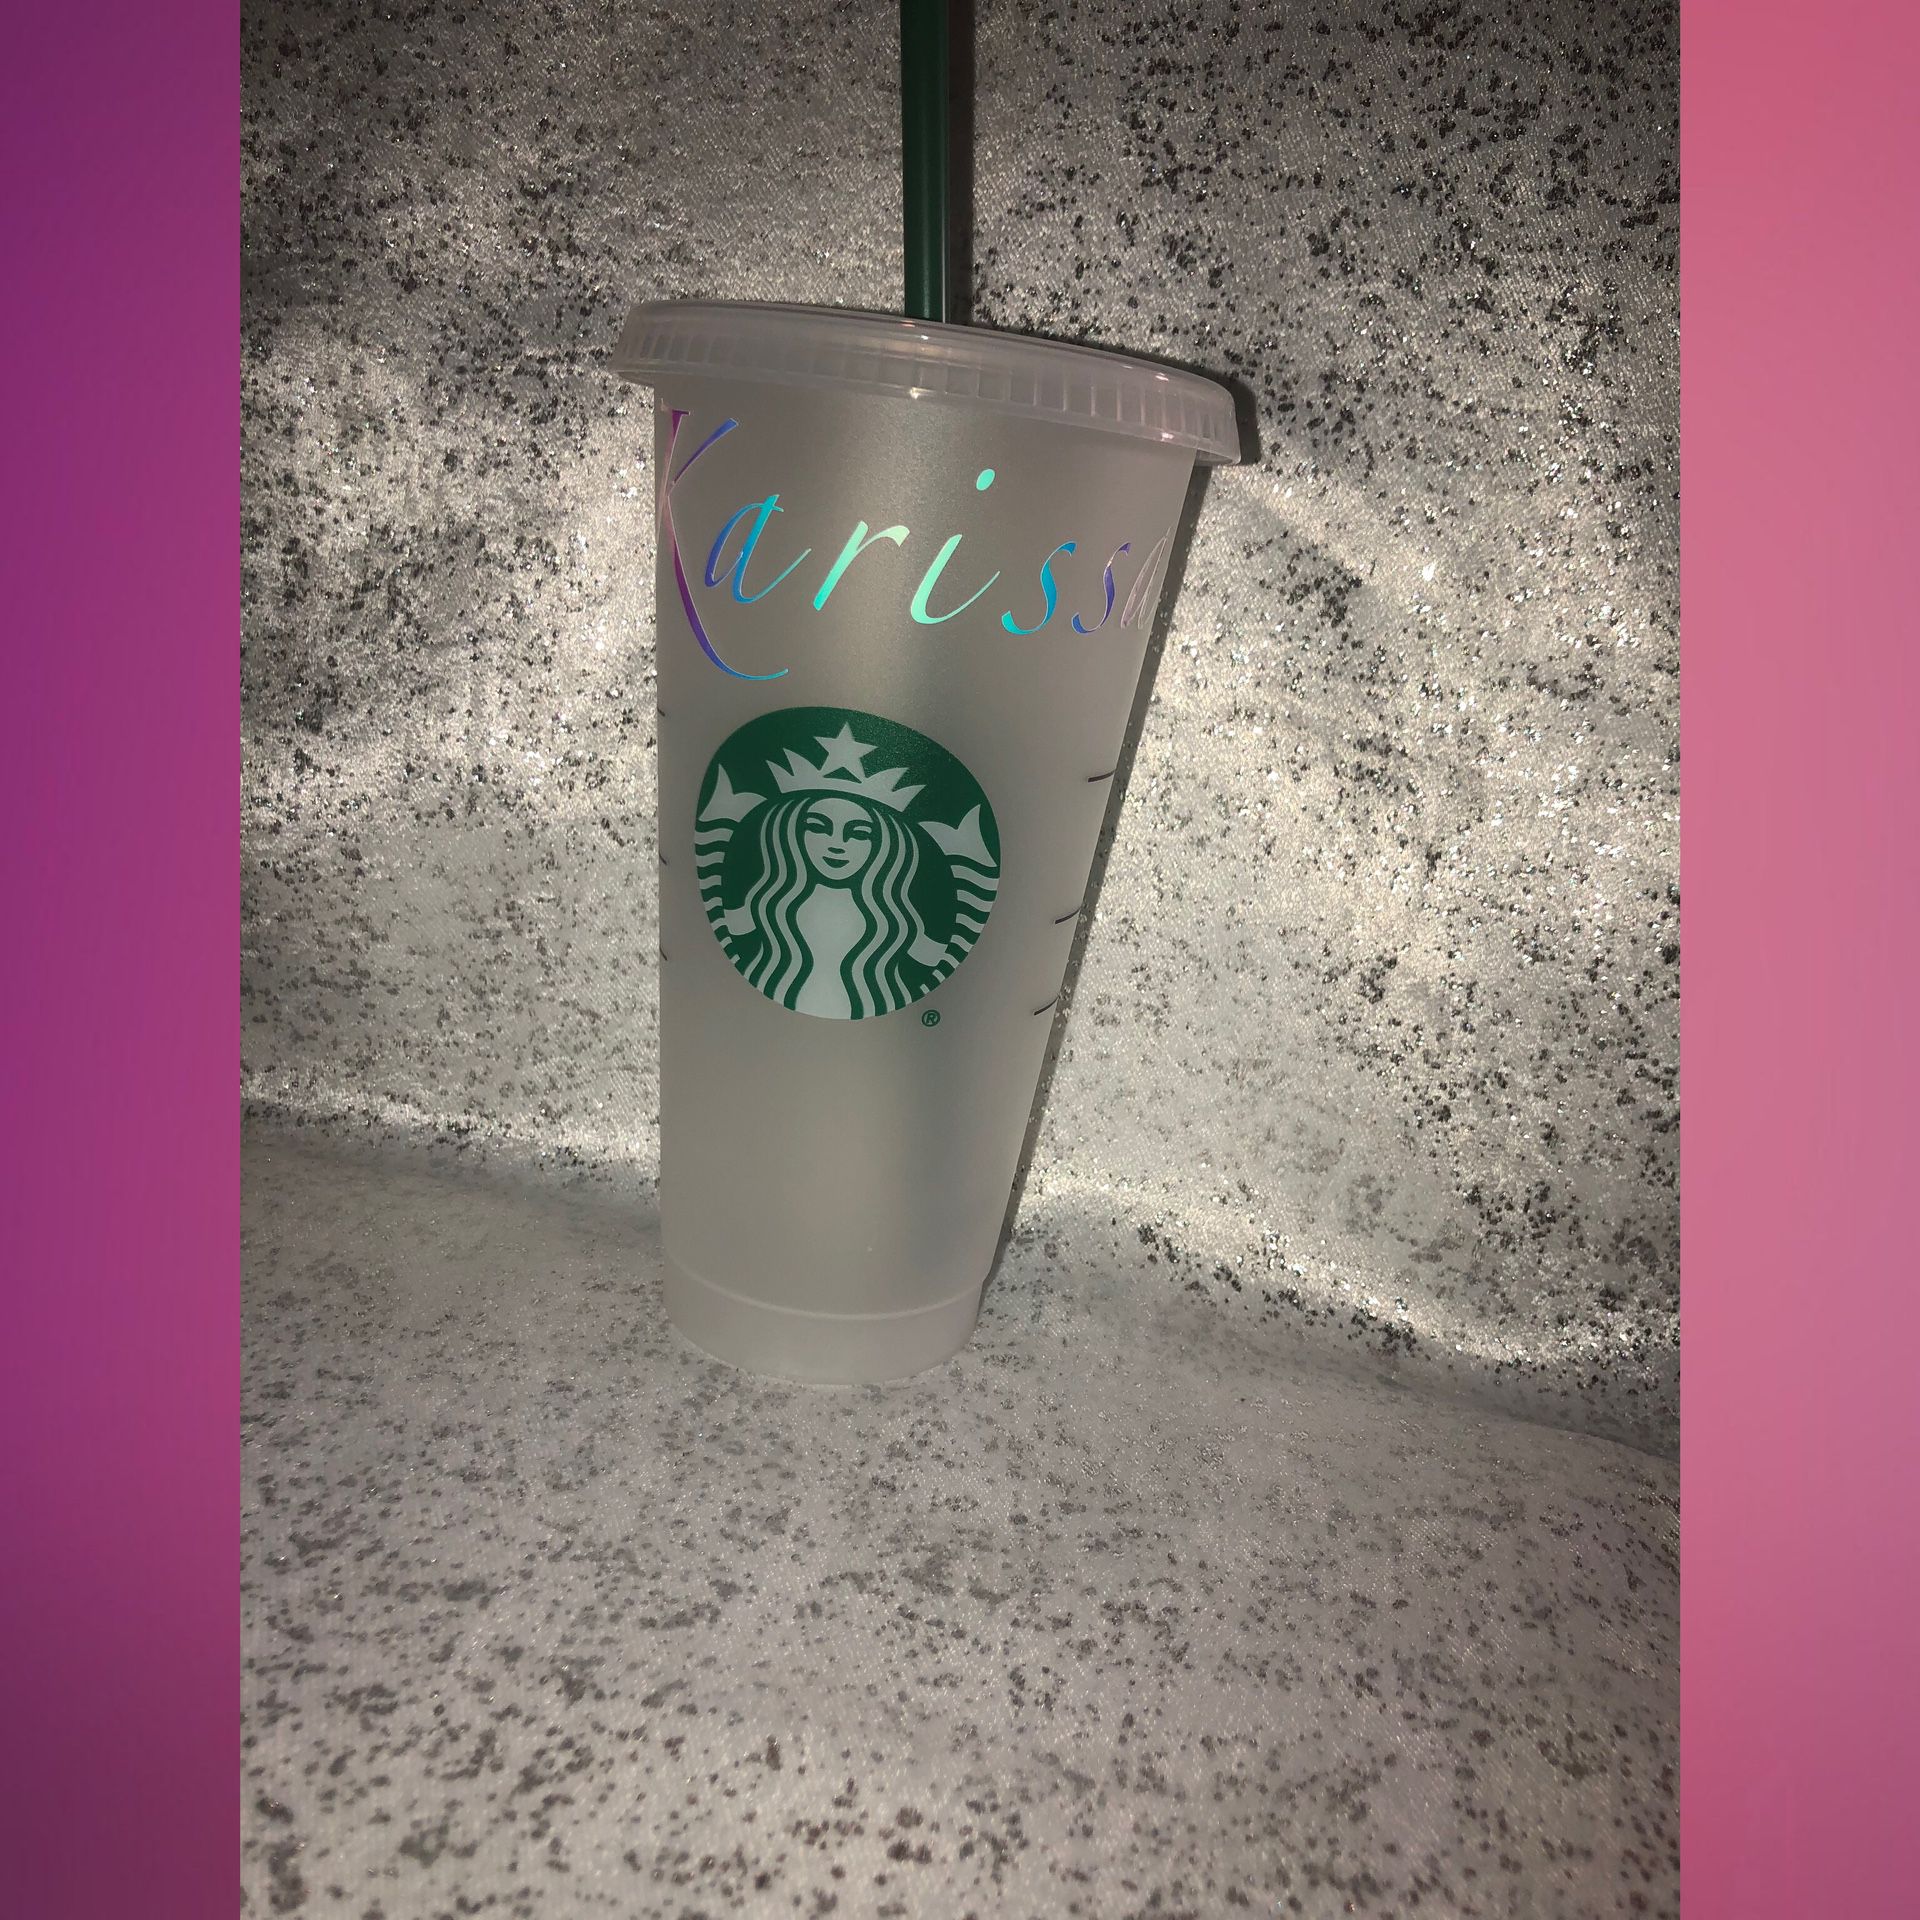 DIY Customized Starbucks Cups - Personalize With a Name